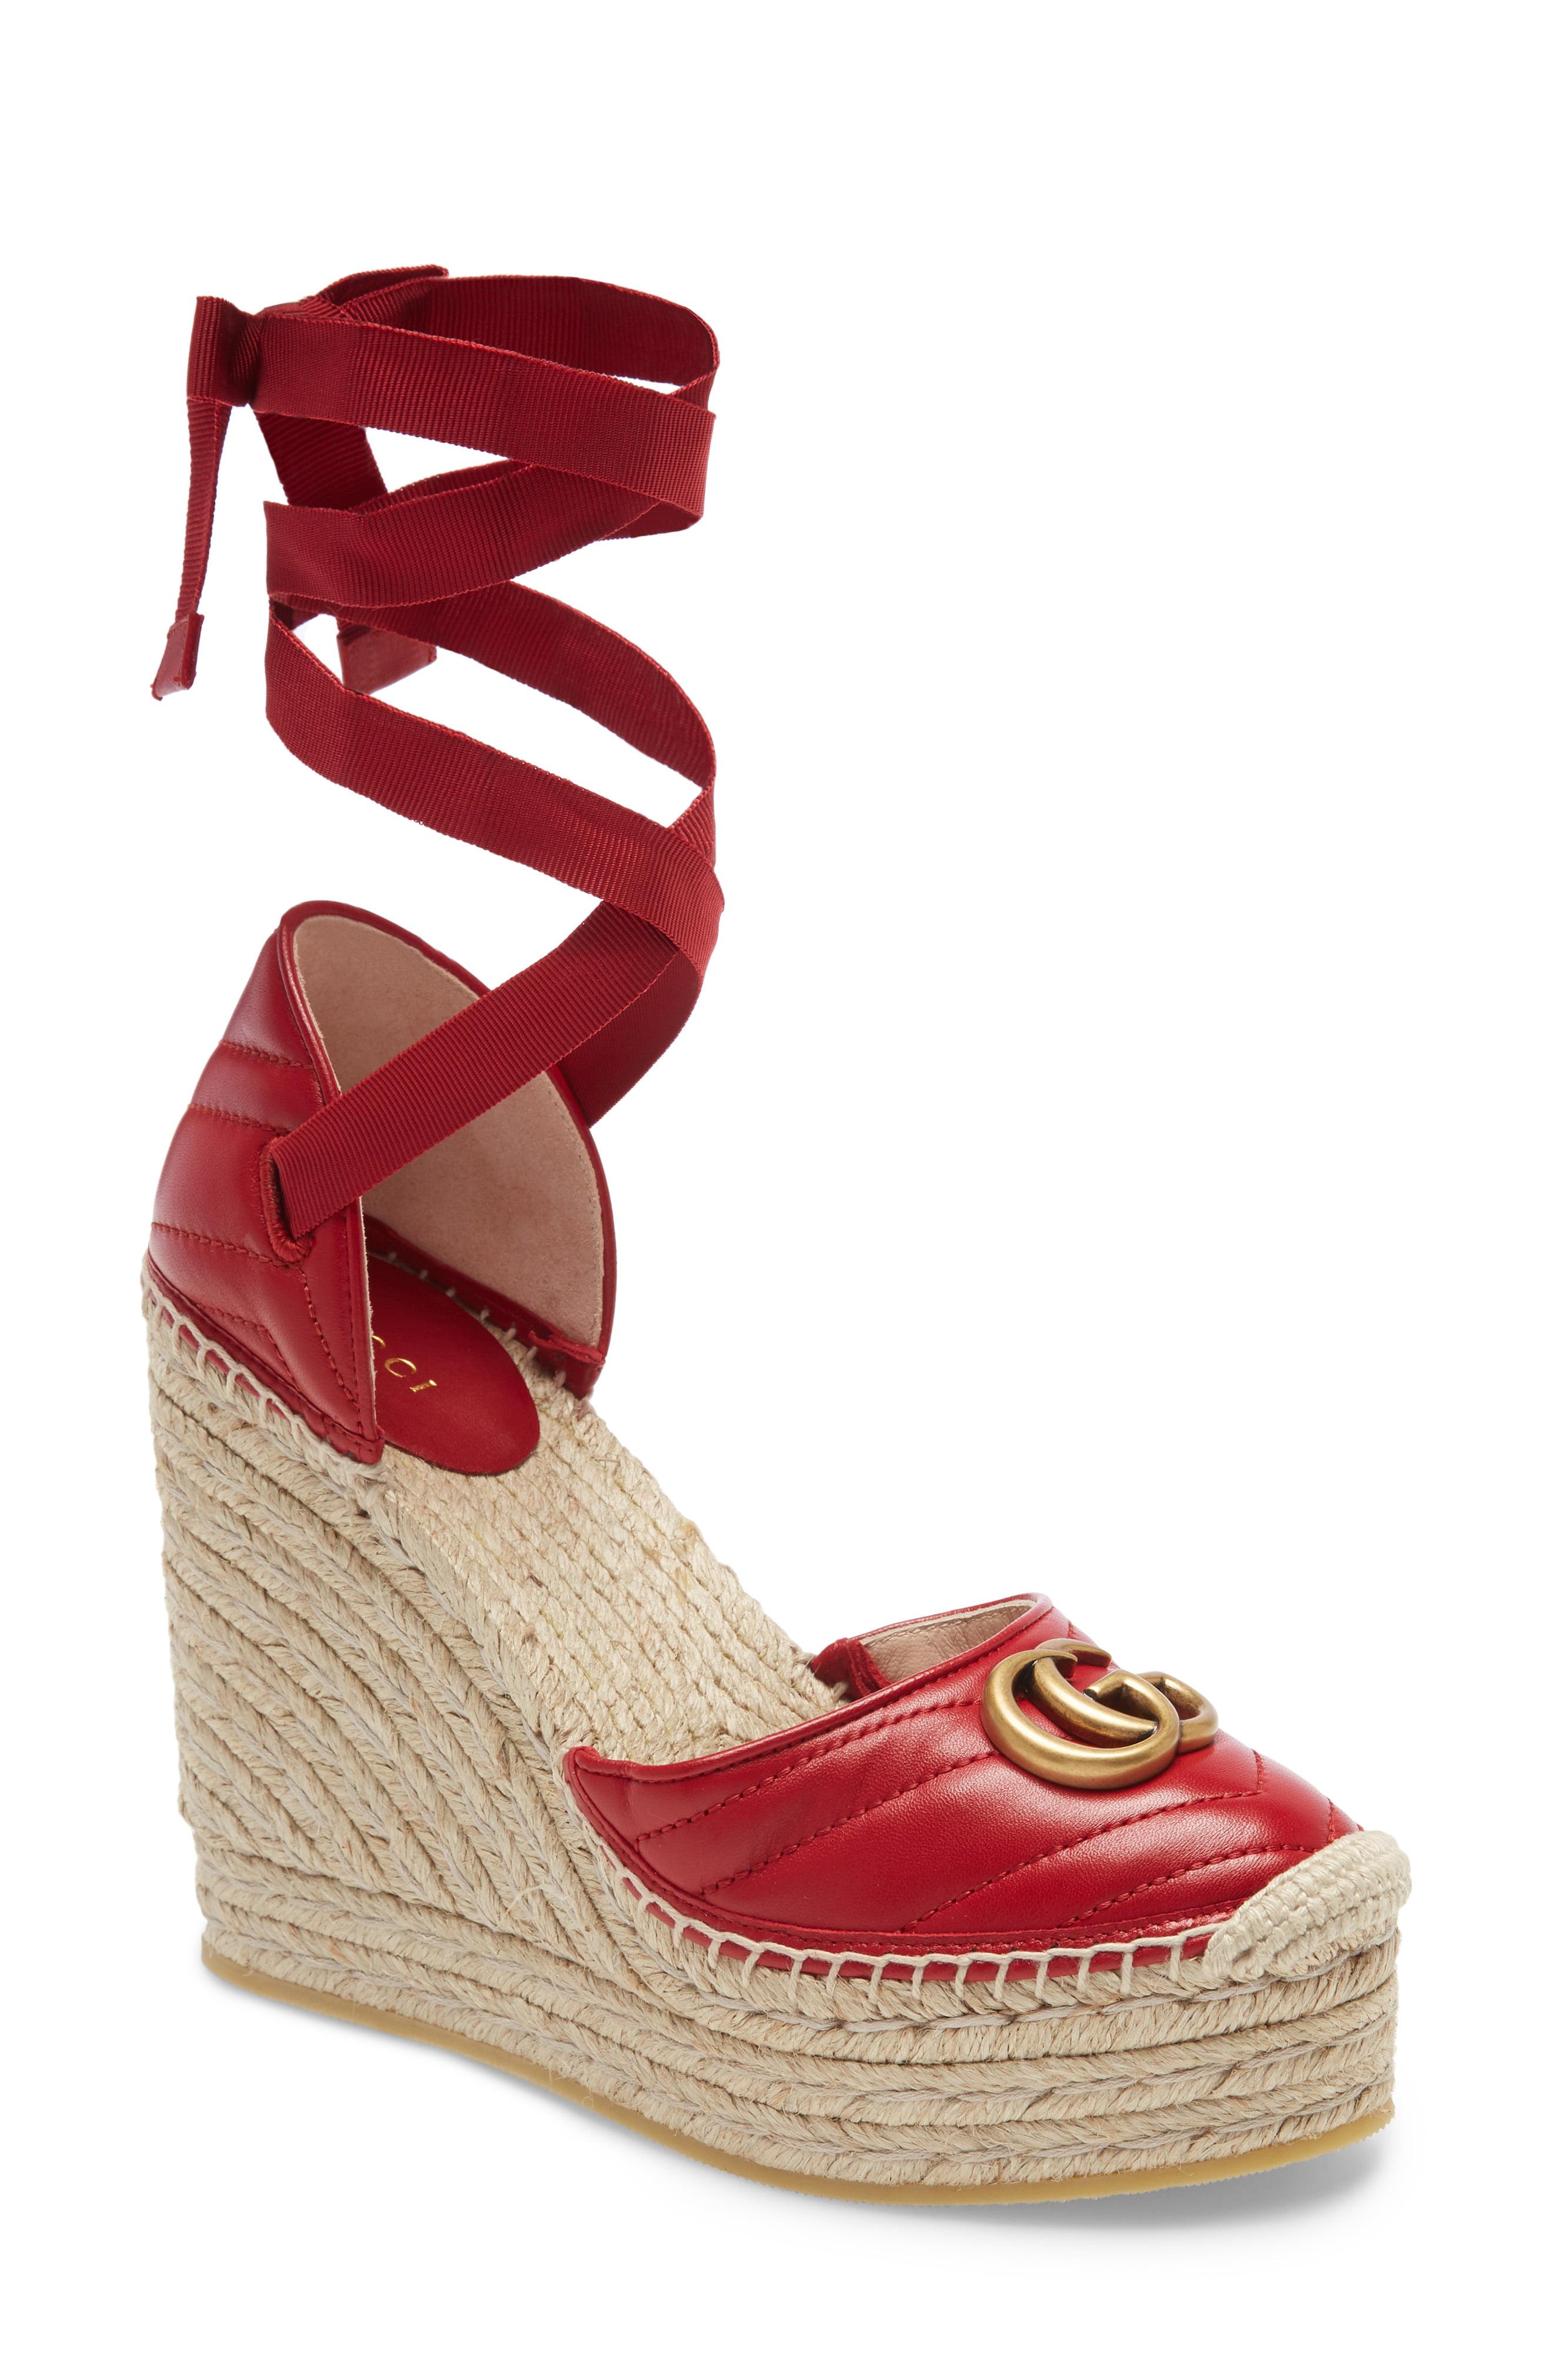 Gucci Palmyra Ankle Tie Espadrille Wedge in Red - Lyst